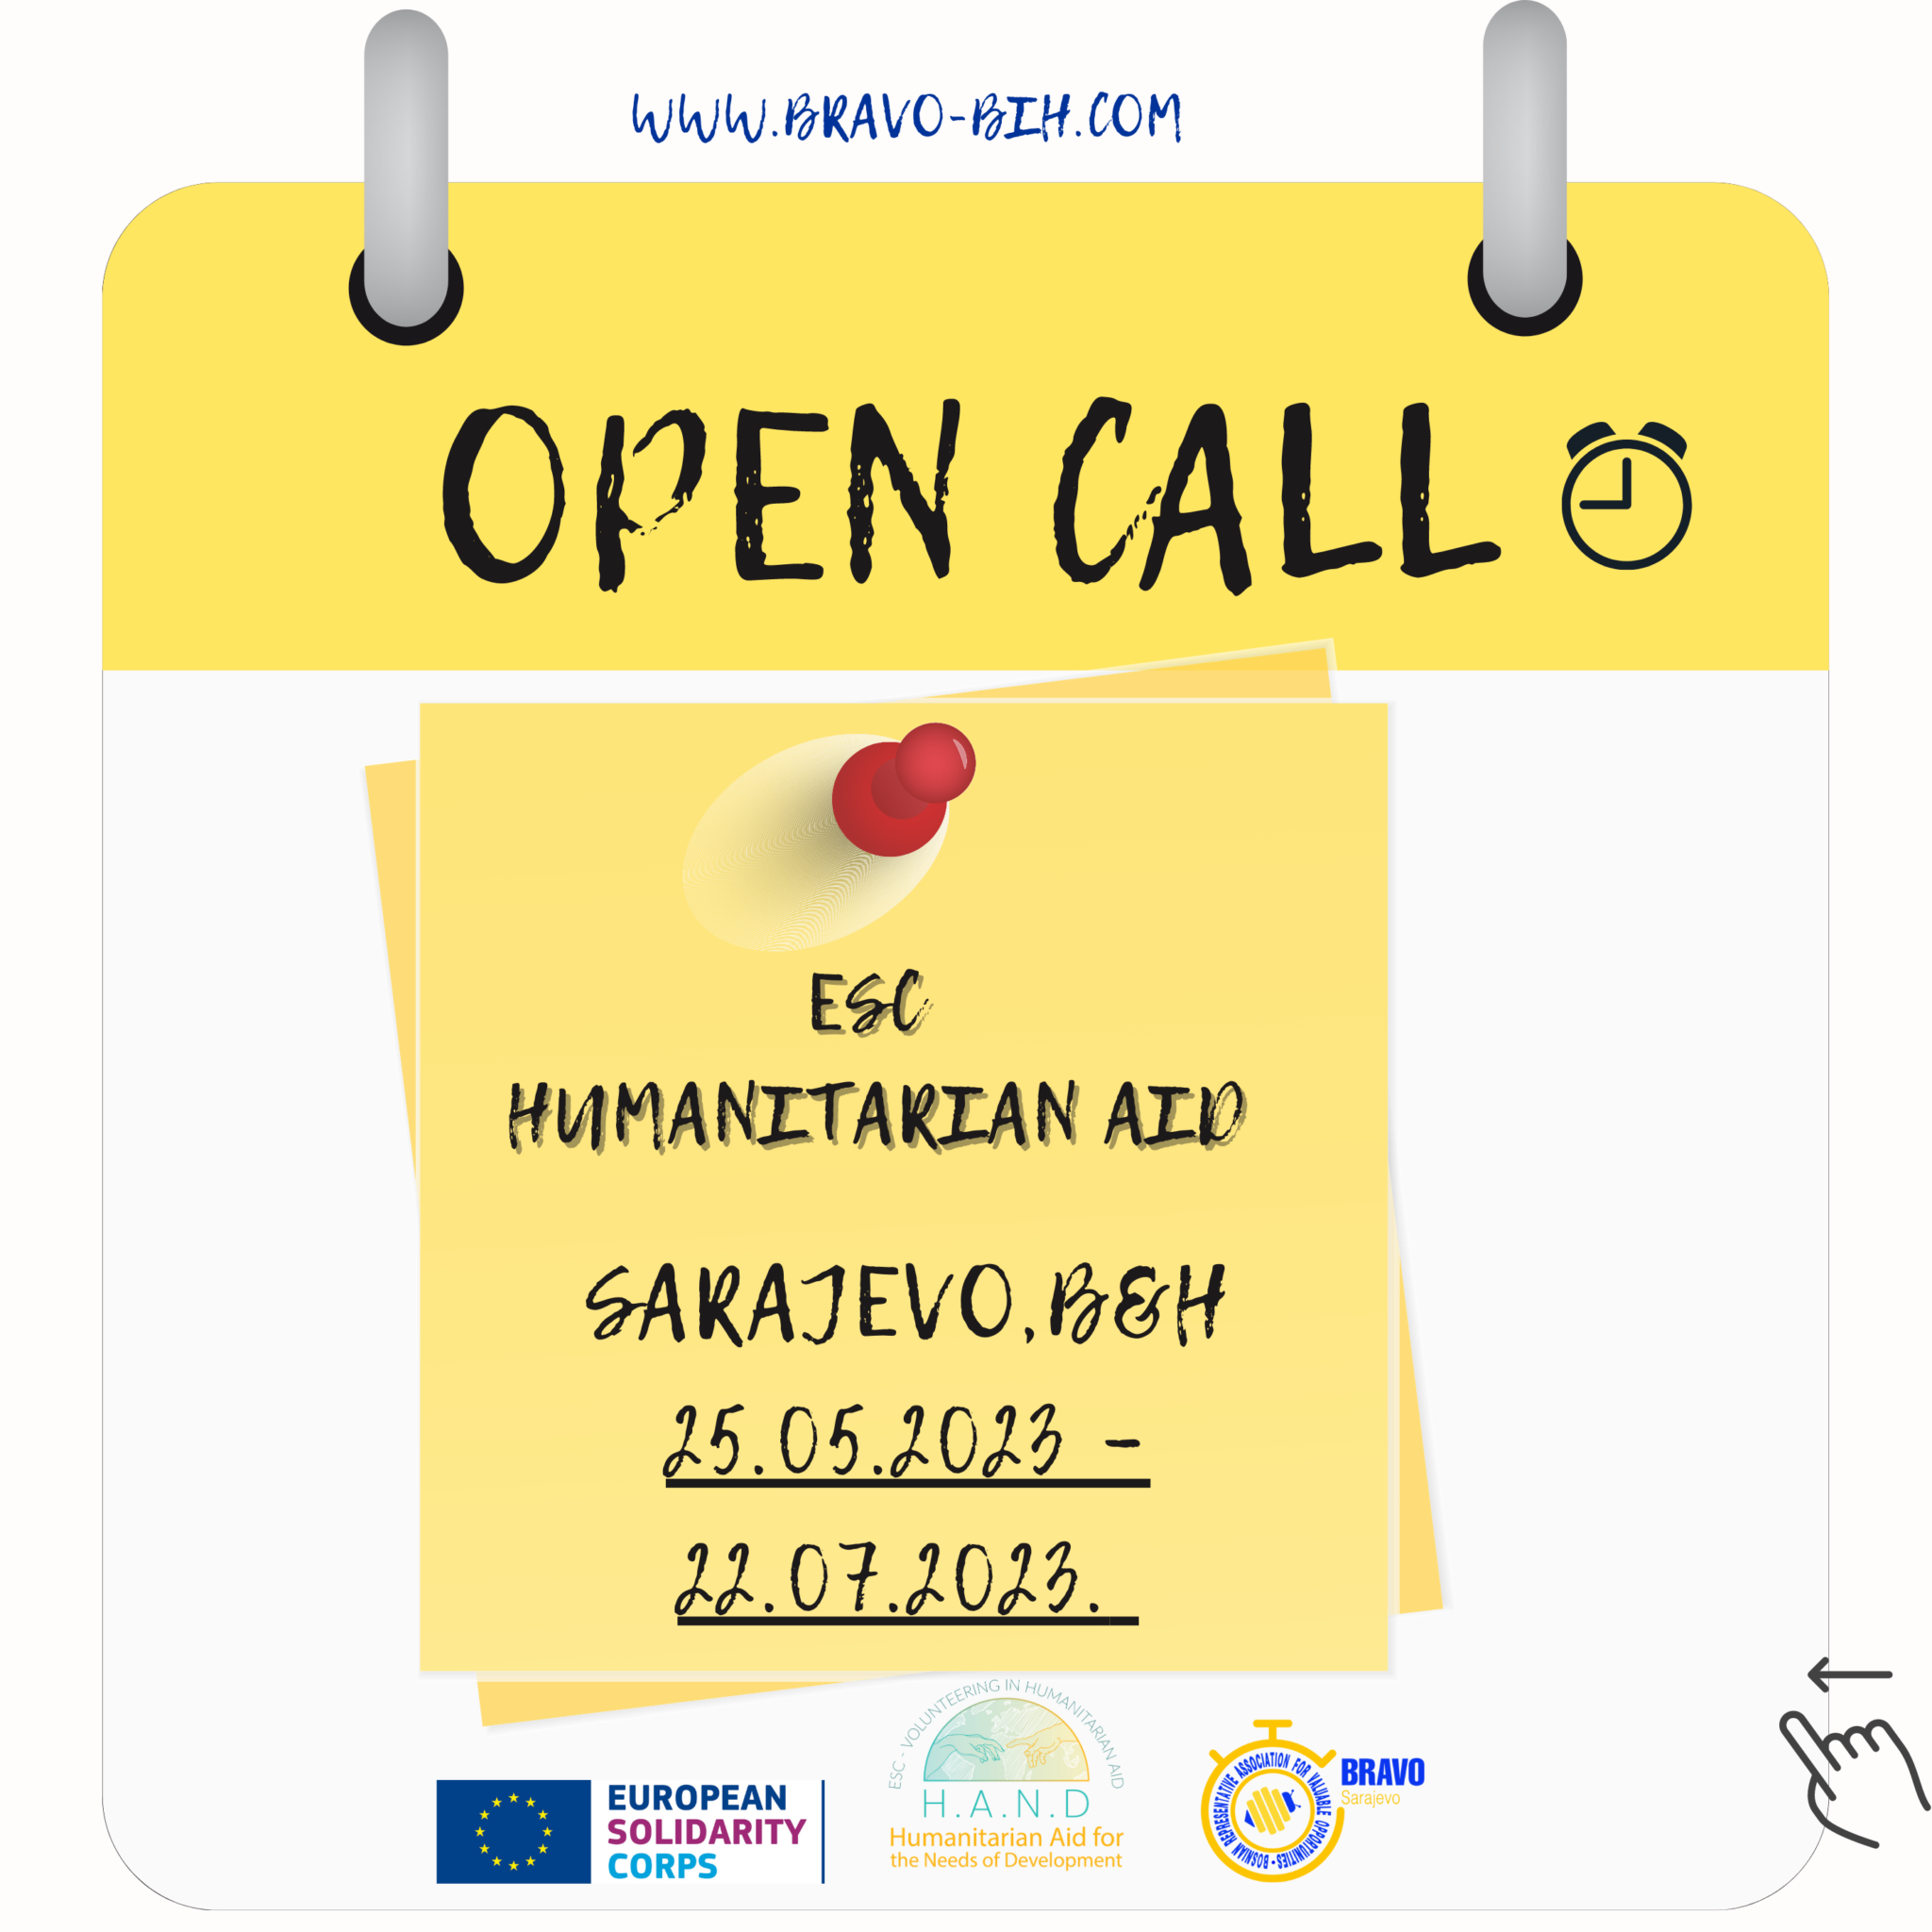 Open call for 10 volunteers from all over Europe for ESC HUMANITARIAN AID project: „H.A.N.D.“